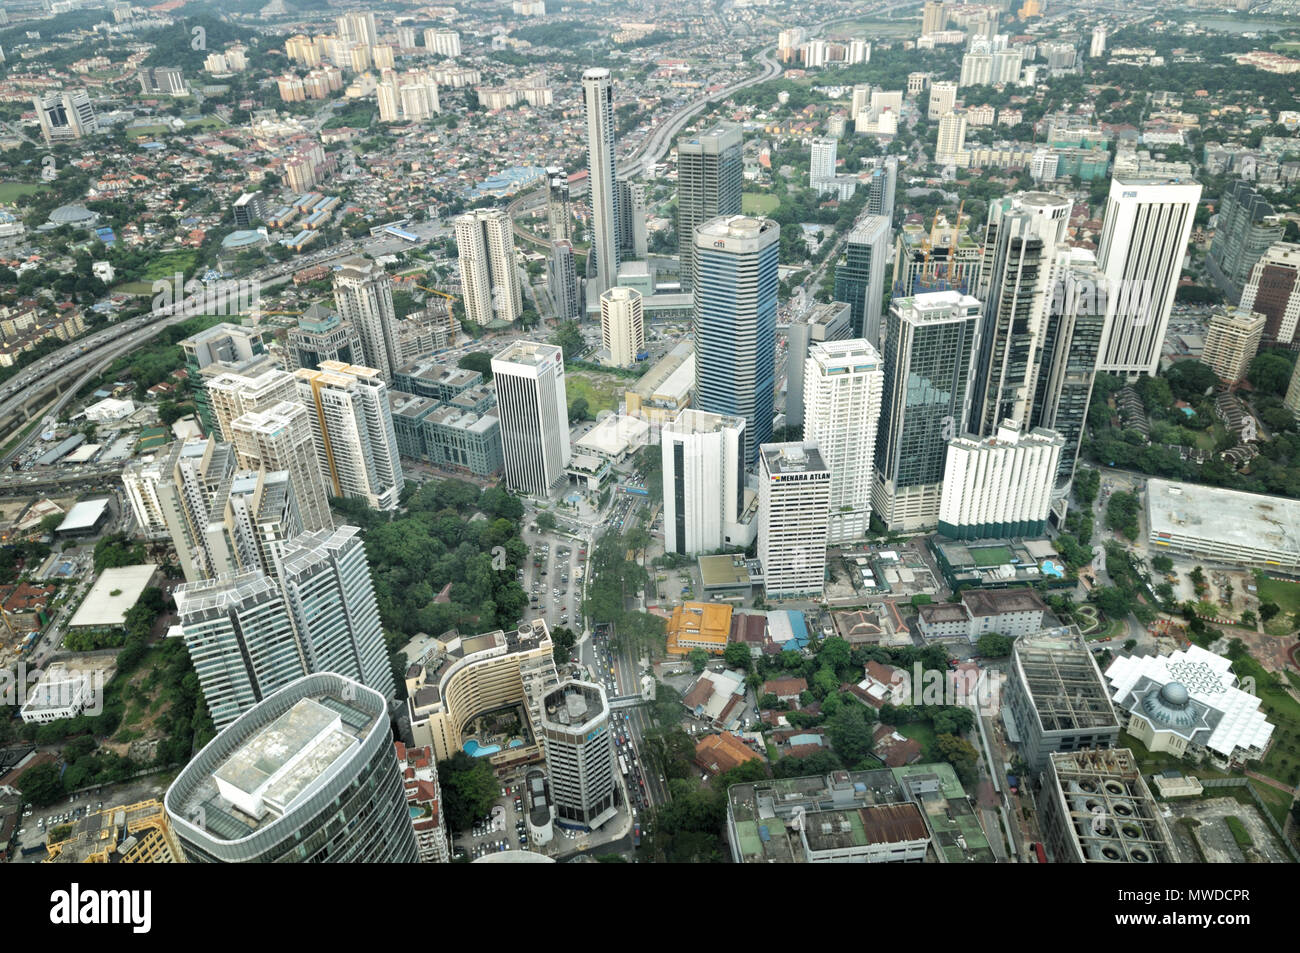 Kuala Lumpur From The 86th Floor Of The Petronas Twin Towers